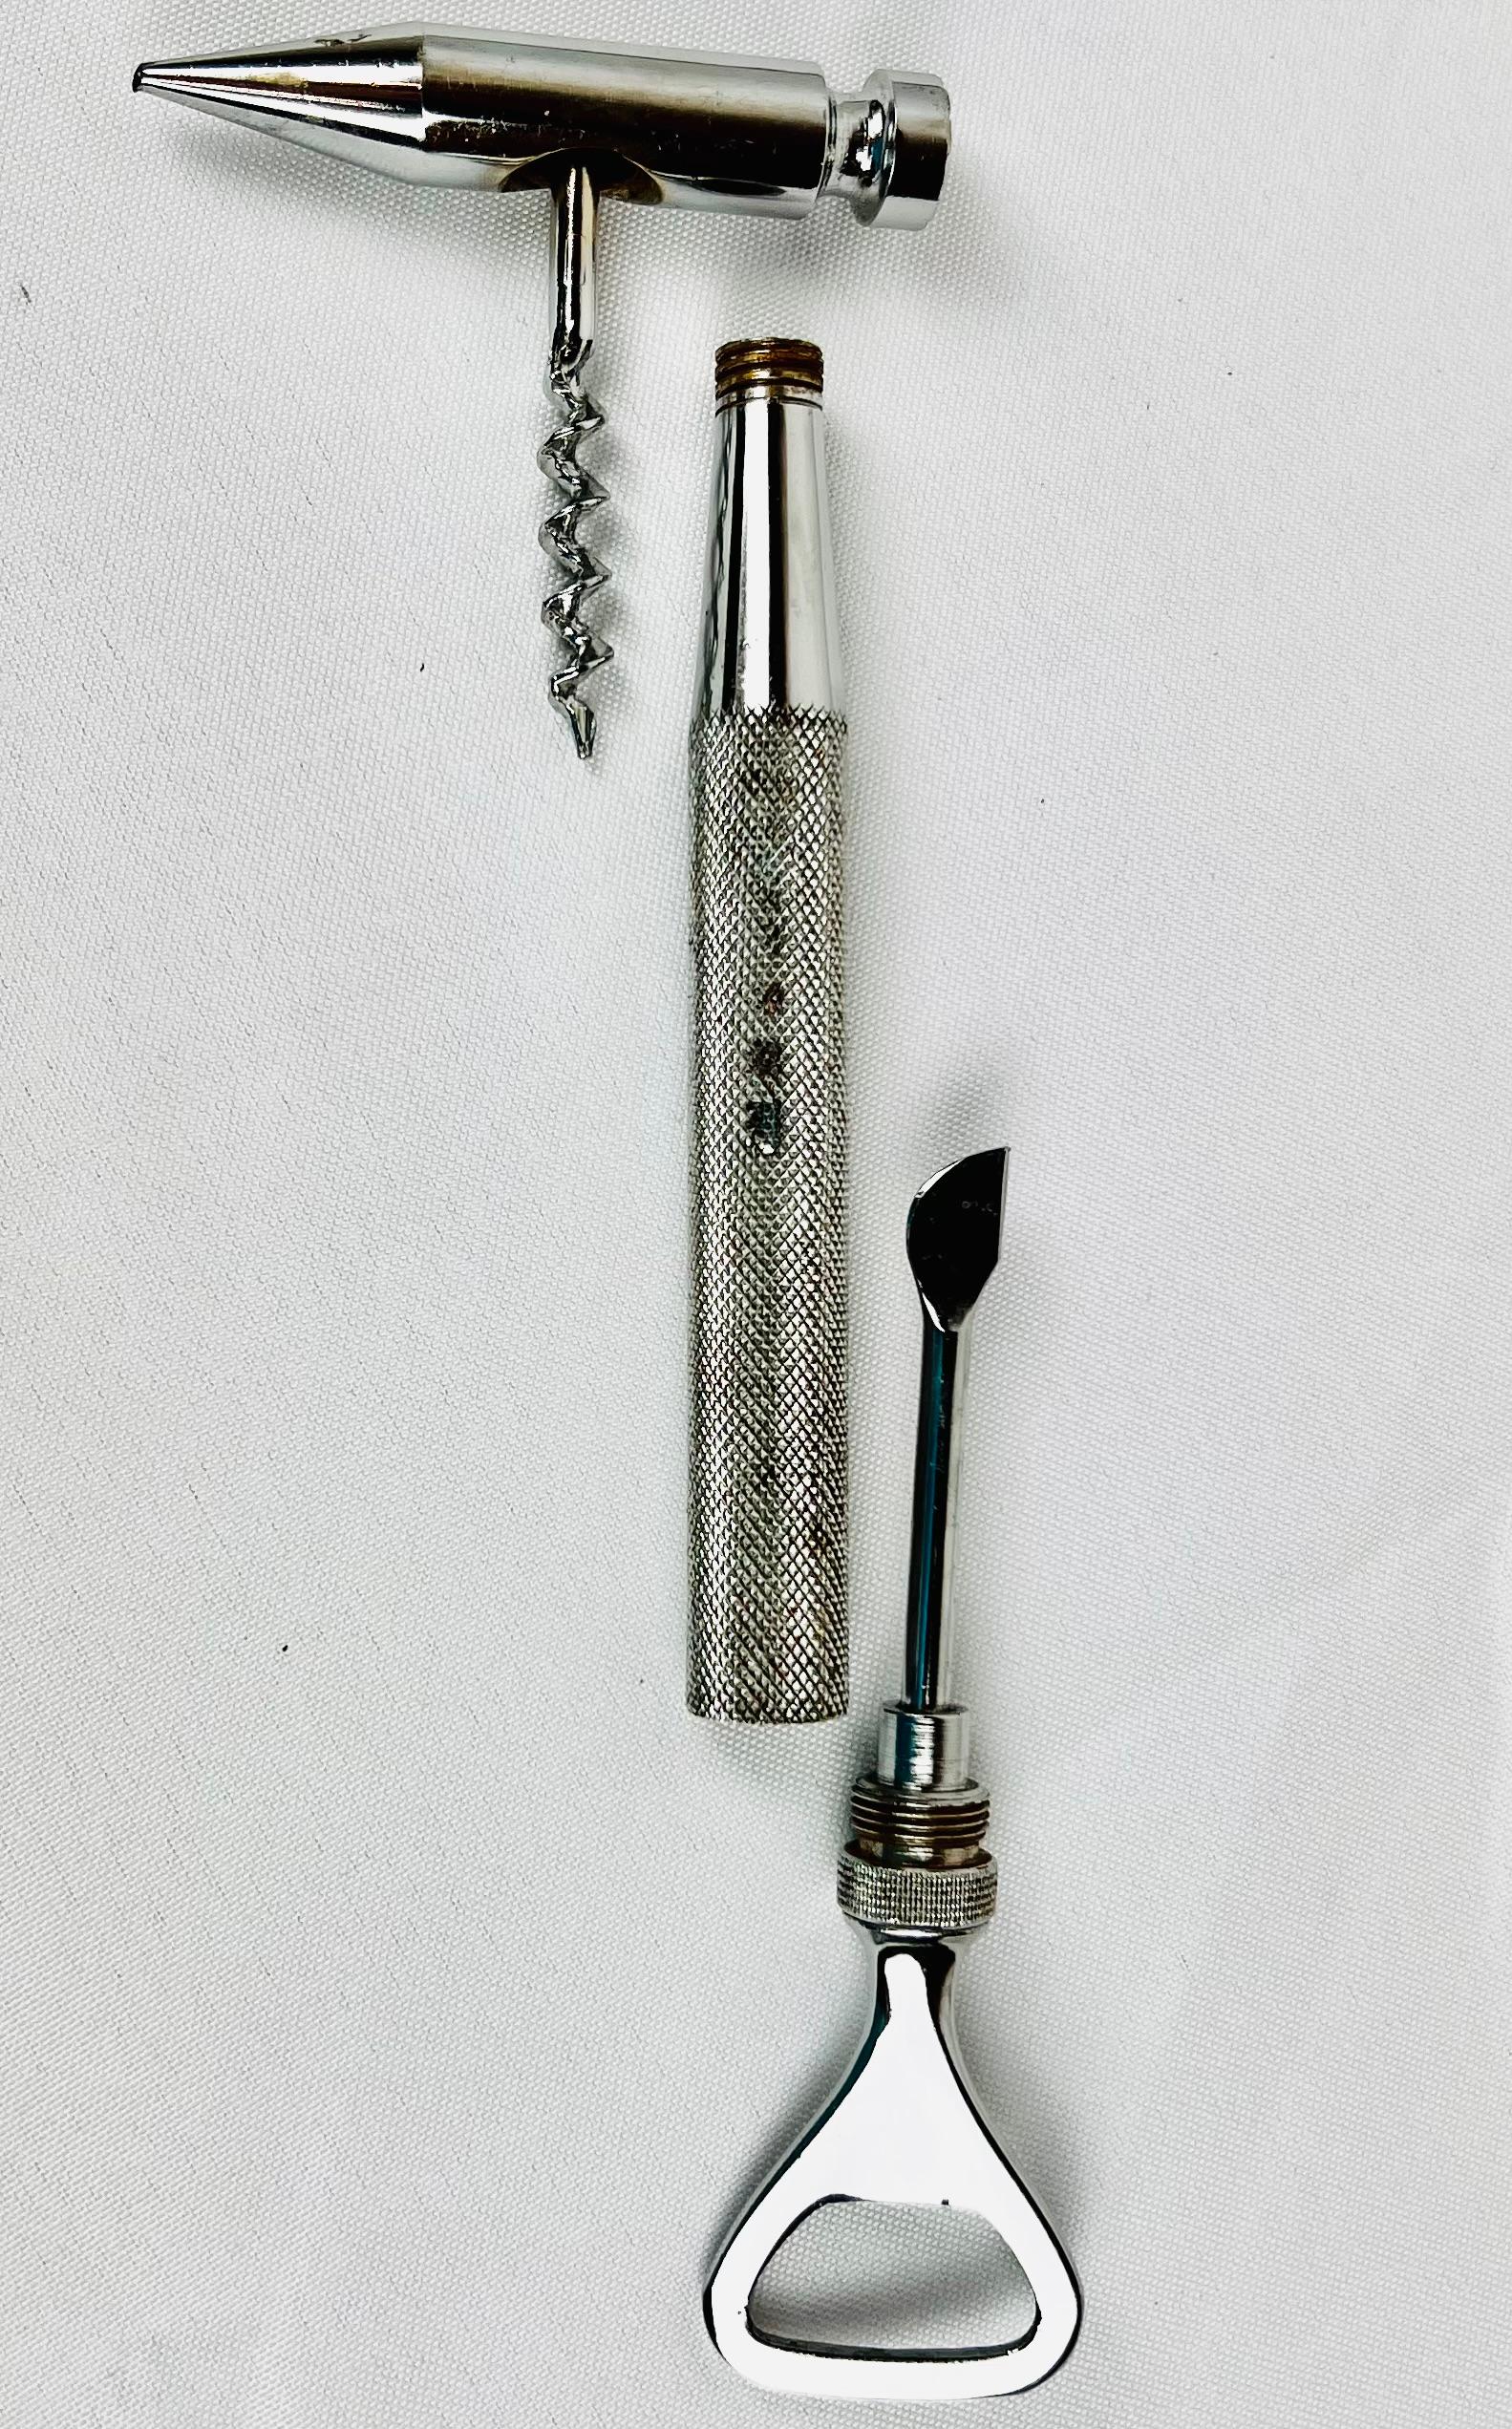 This unique bartool separates into three pieces. The body has a non-slip textured surface. The bottle opener unscrews from the top revealing a bar knife. The bottom section has the ice pick and ice chopper. It unscrews to reveal the corkscrew while